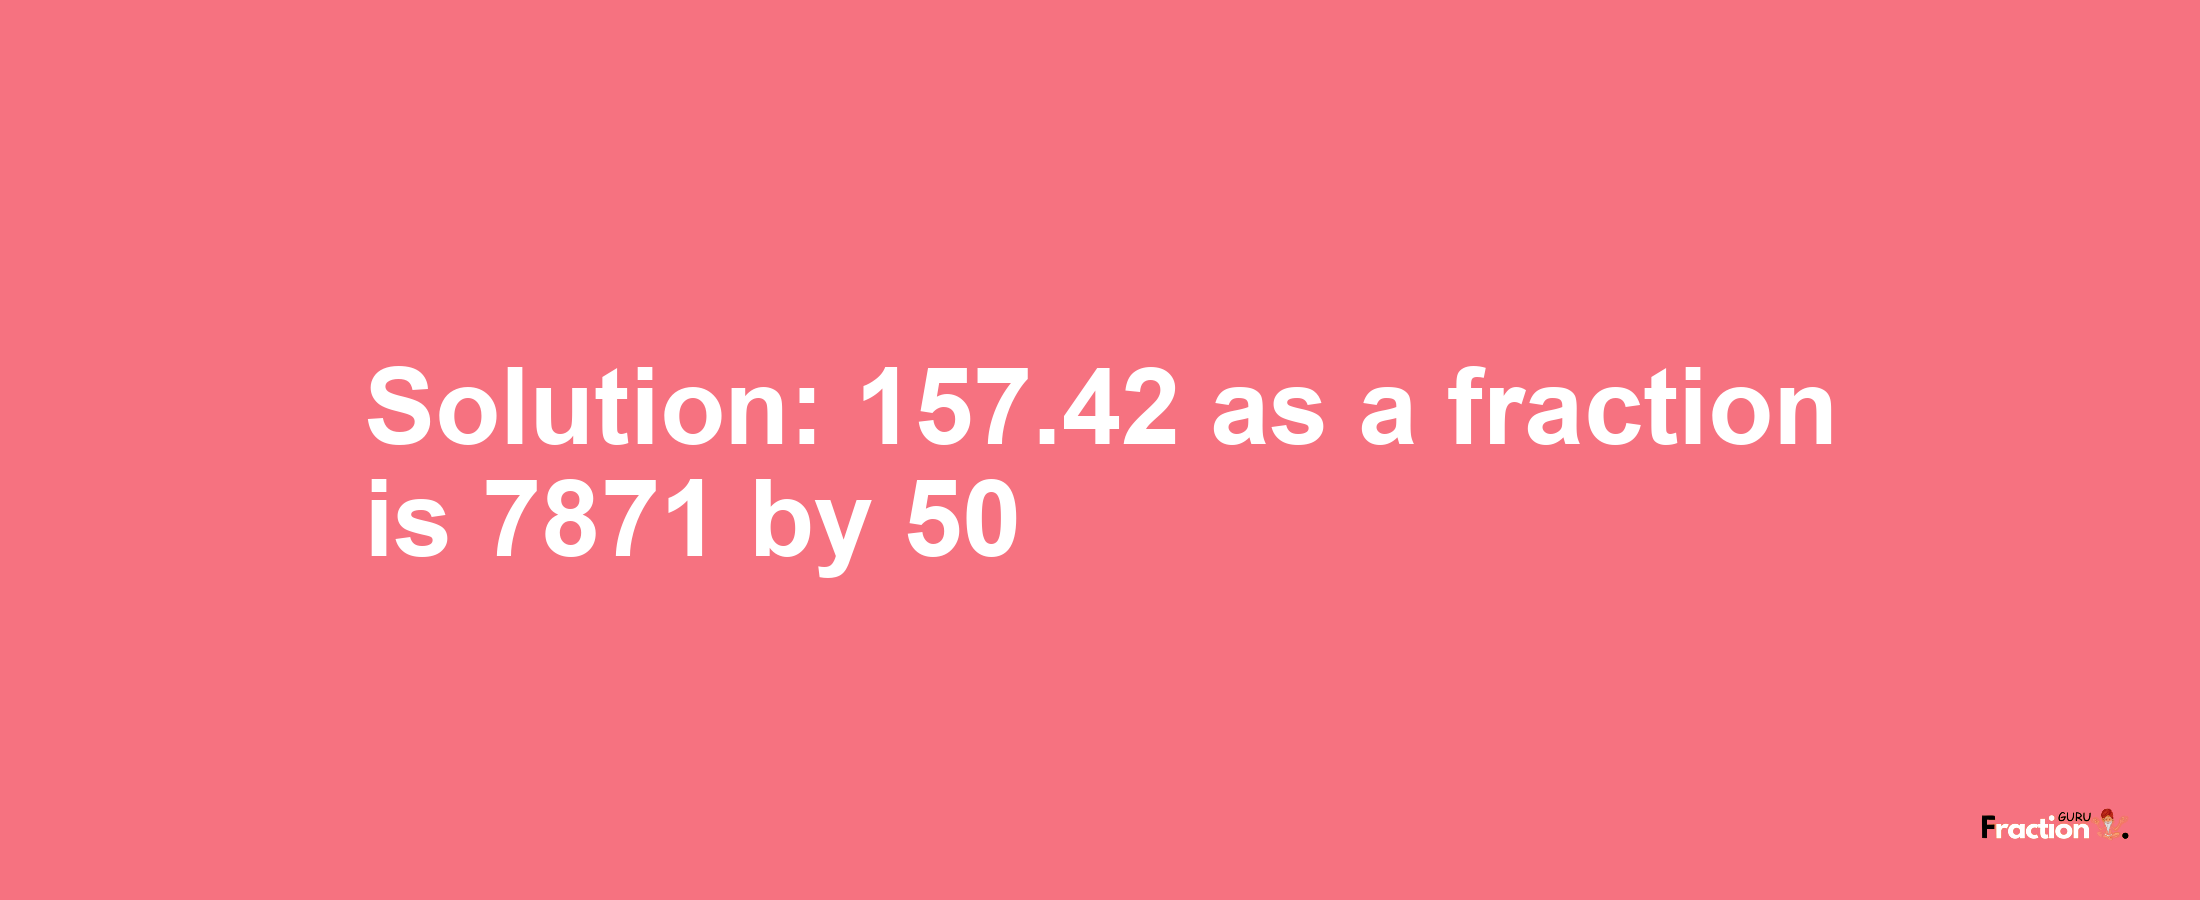 Solution:157.42 as a fraction is 7871/50